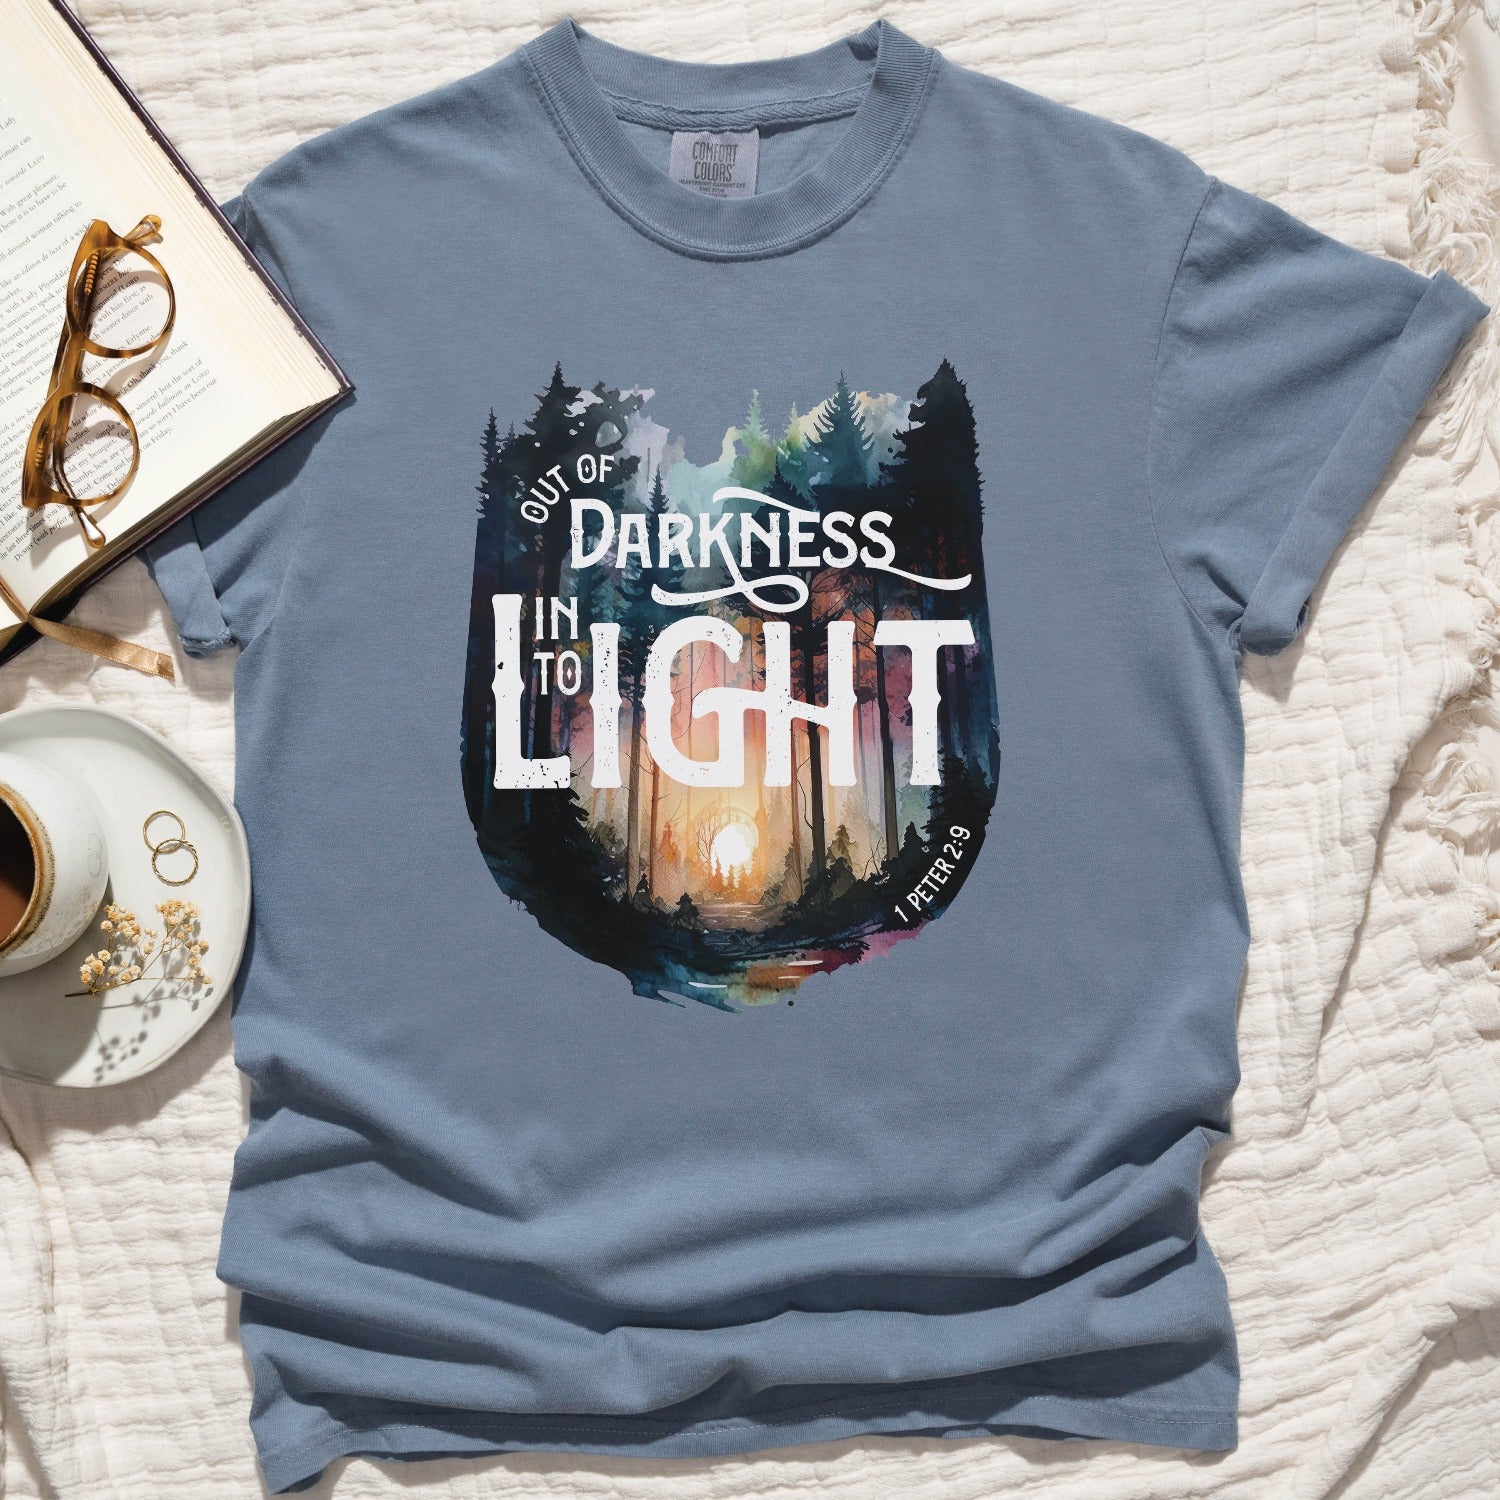 Blue Jean dusty blue color garment dyed Comfort Colors C1717 unisex faith-based Christian t-shirt with "Out of Darkness, Into Light" 1 Peter 2:9 bible verse and watercolor moody forest trees outdoor scene, designed for men and women